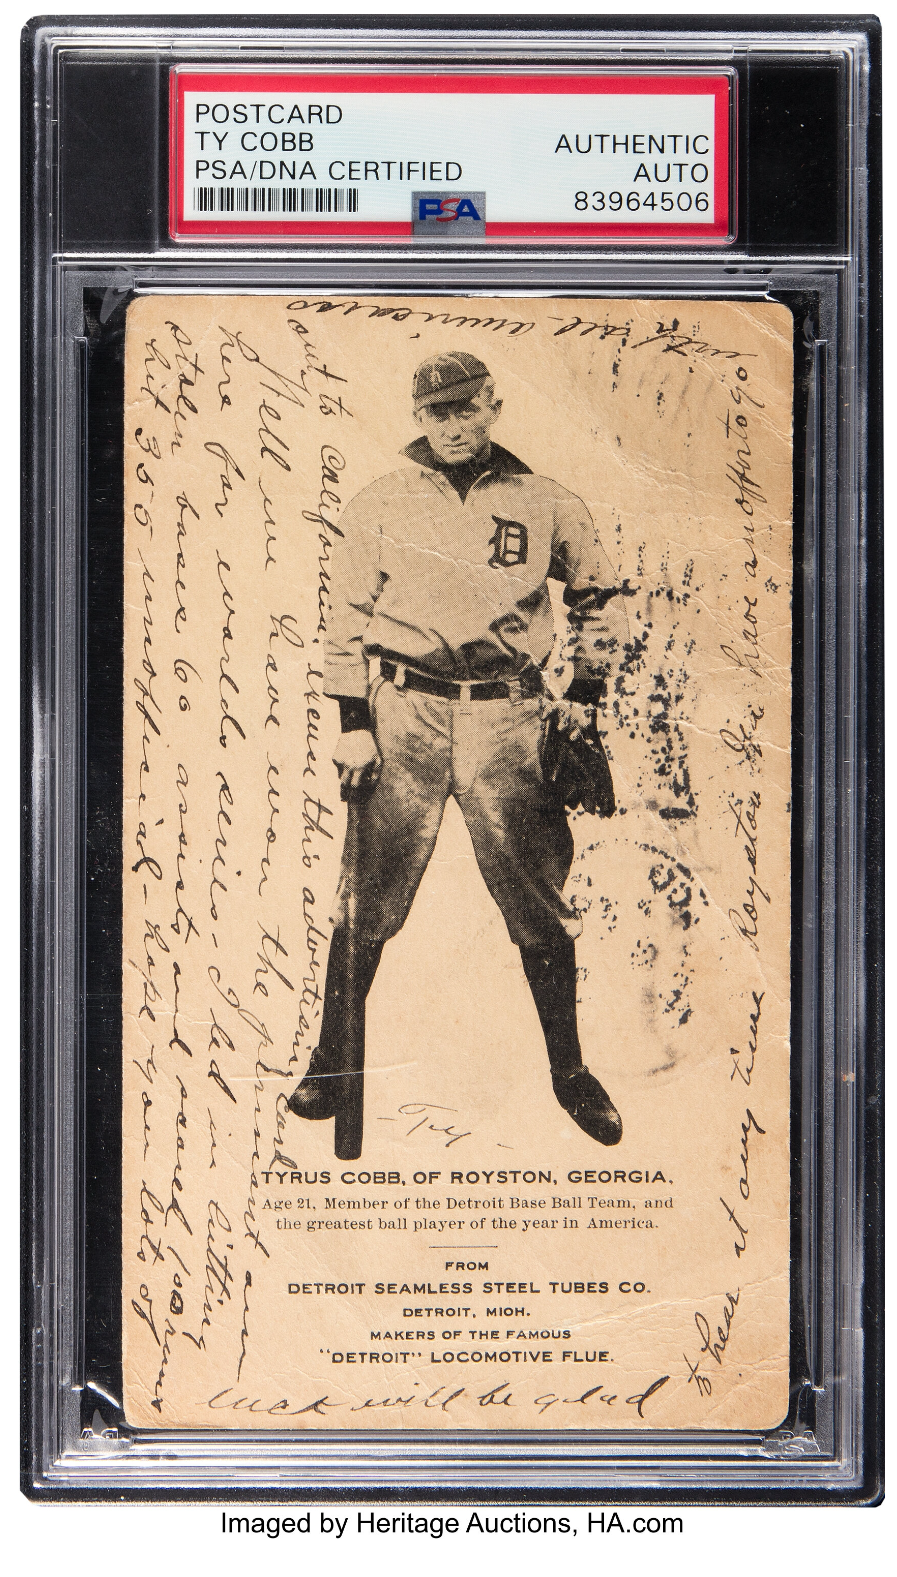 Rare Ty Cobb Rookie Card with Handwritten Message Goes to Auction